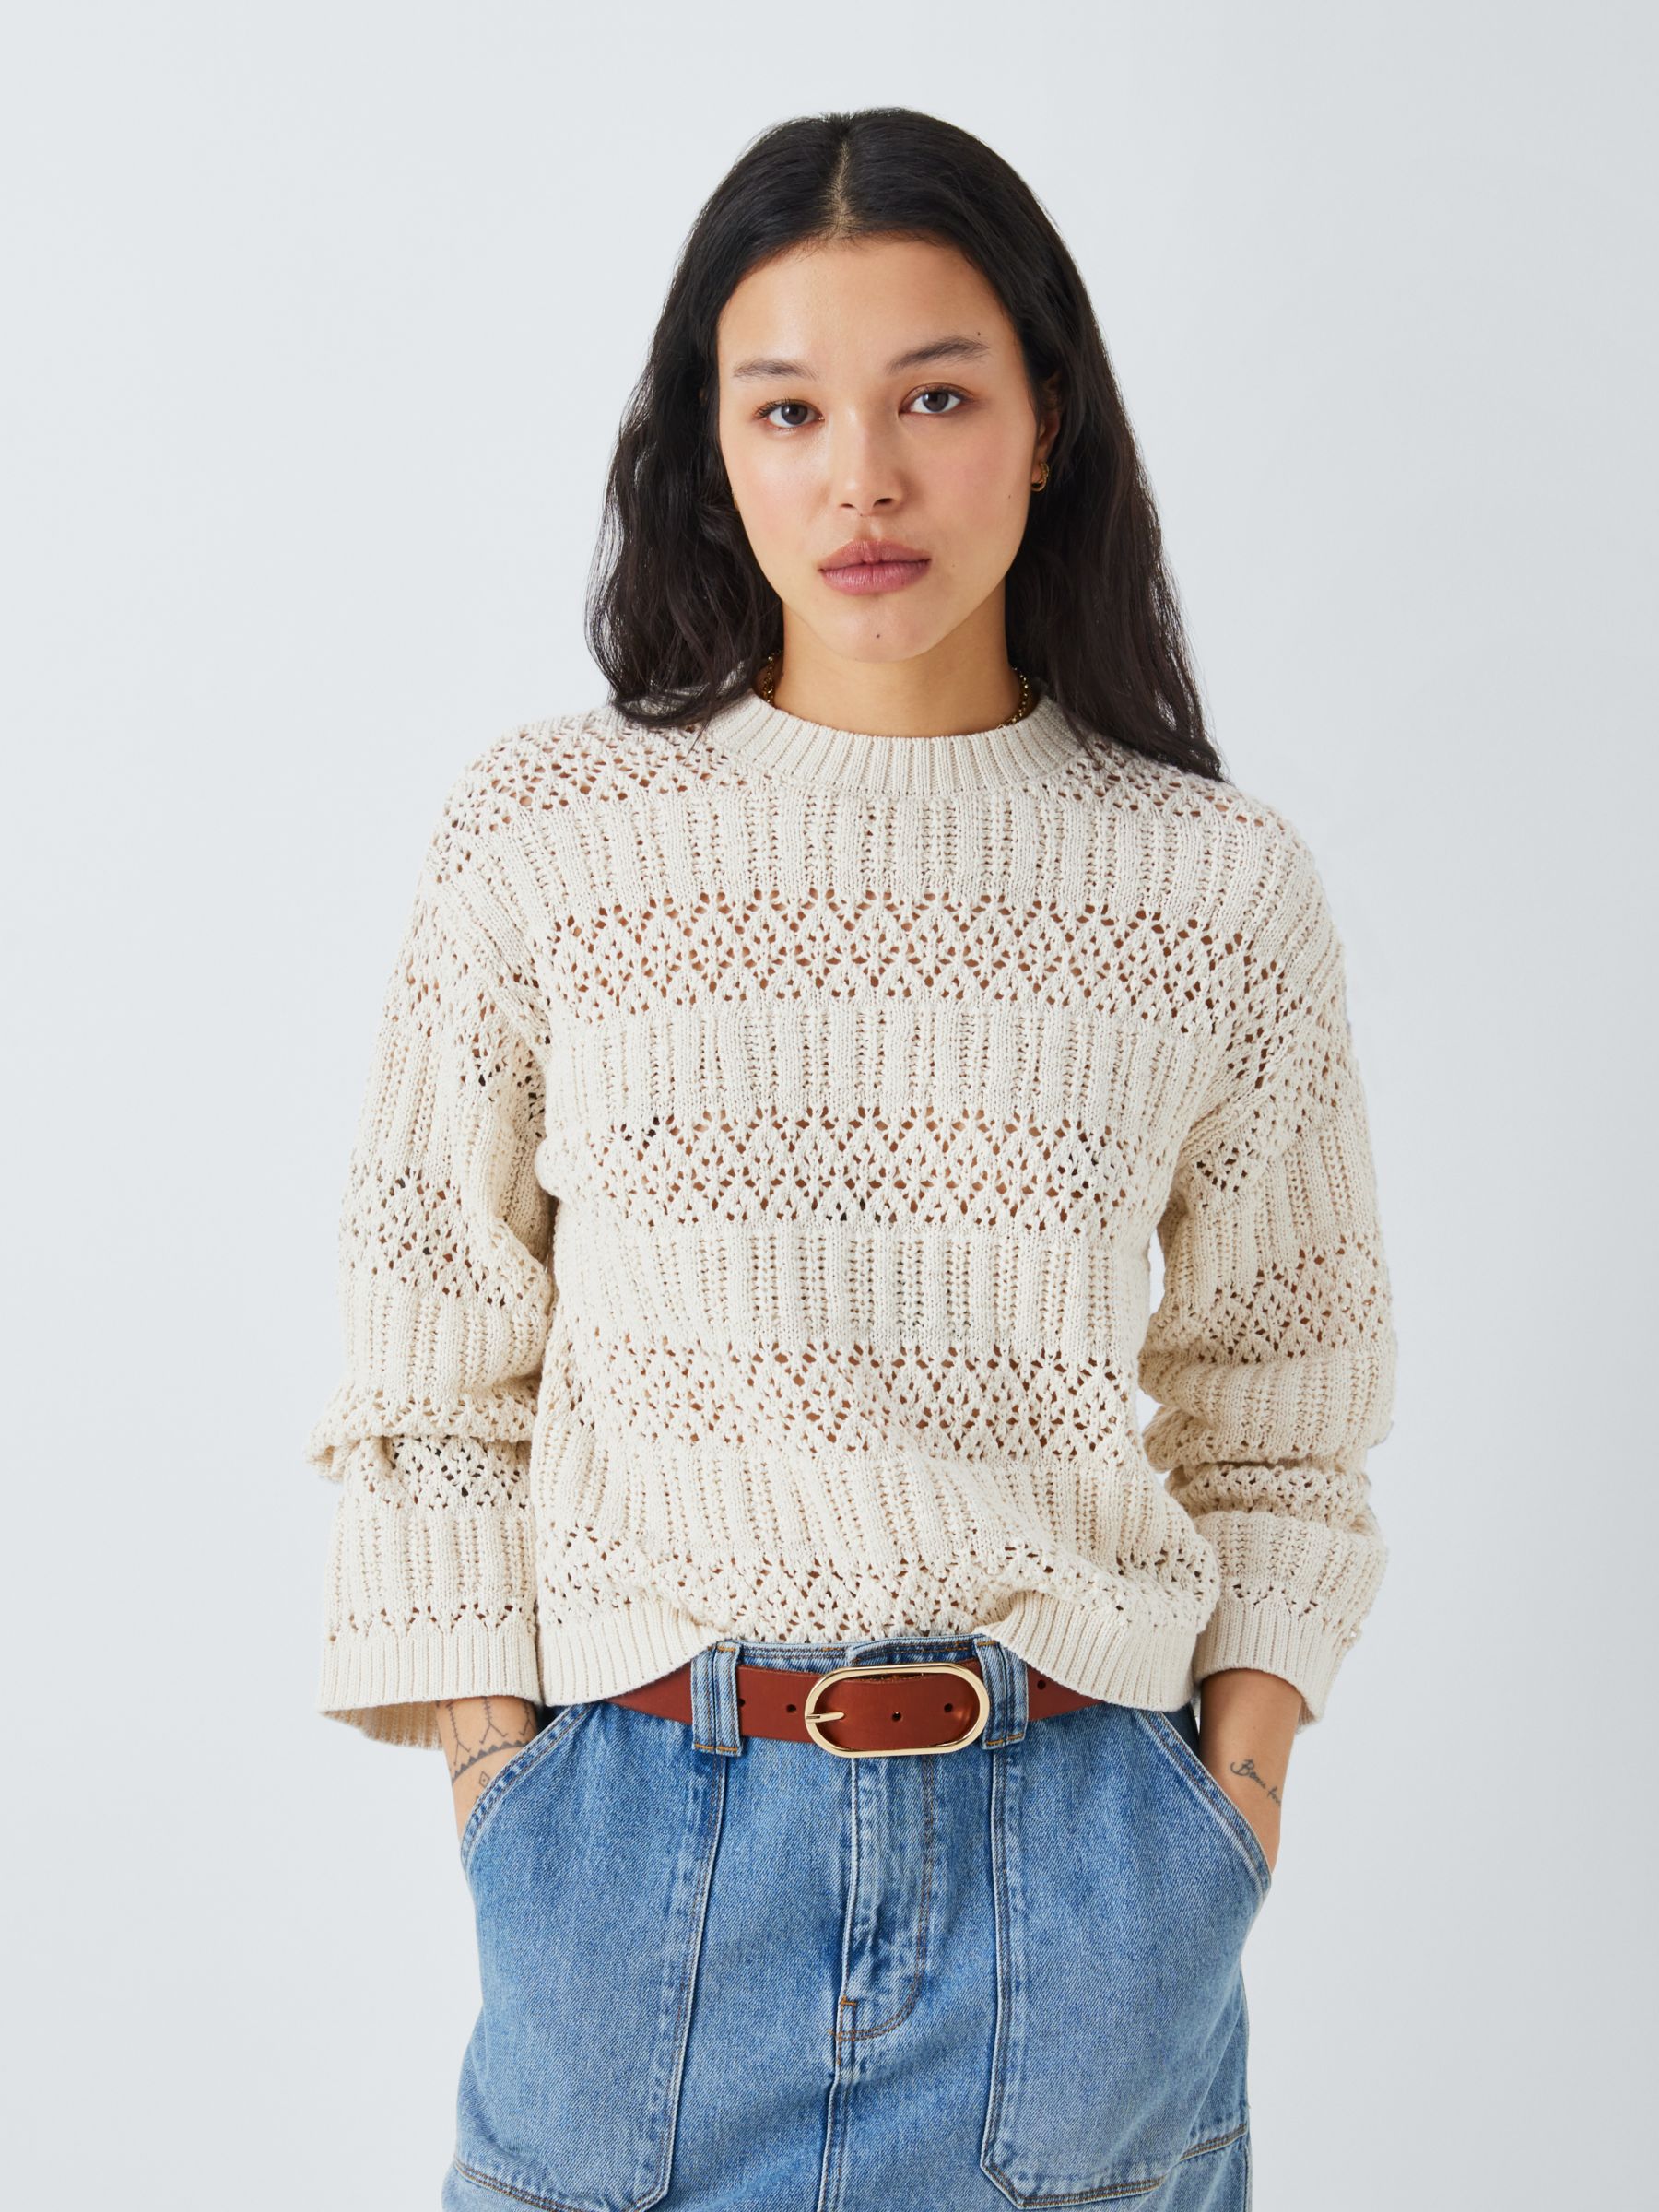 AND/OR Stevie Crochet Jumper, Cream, XS